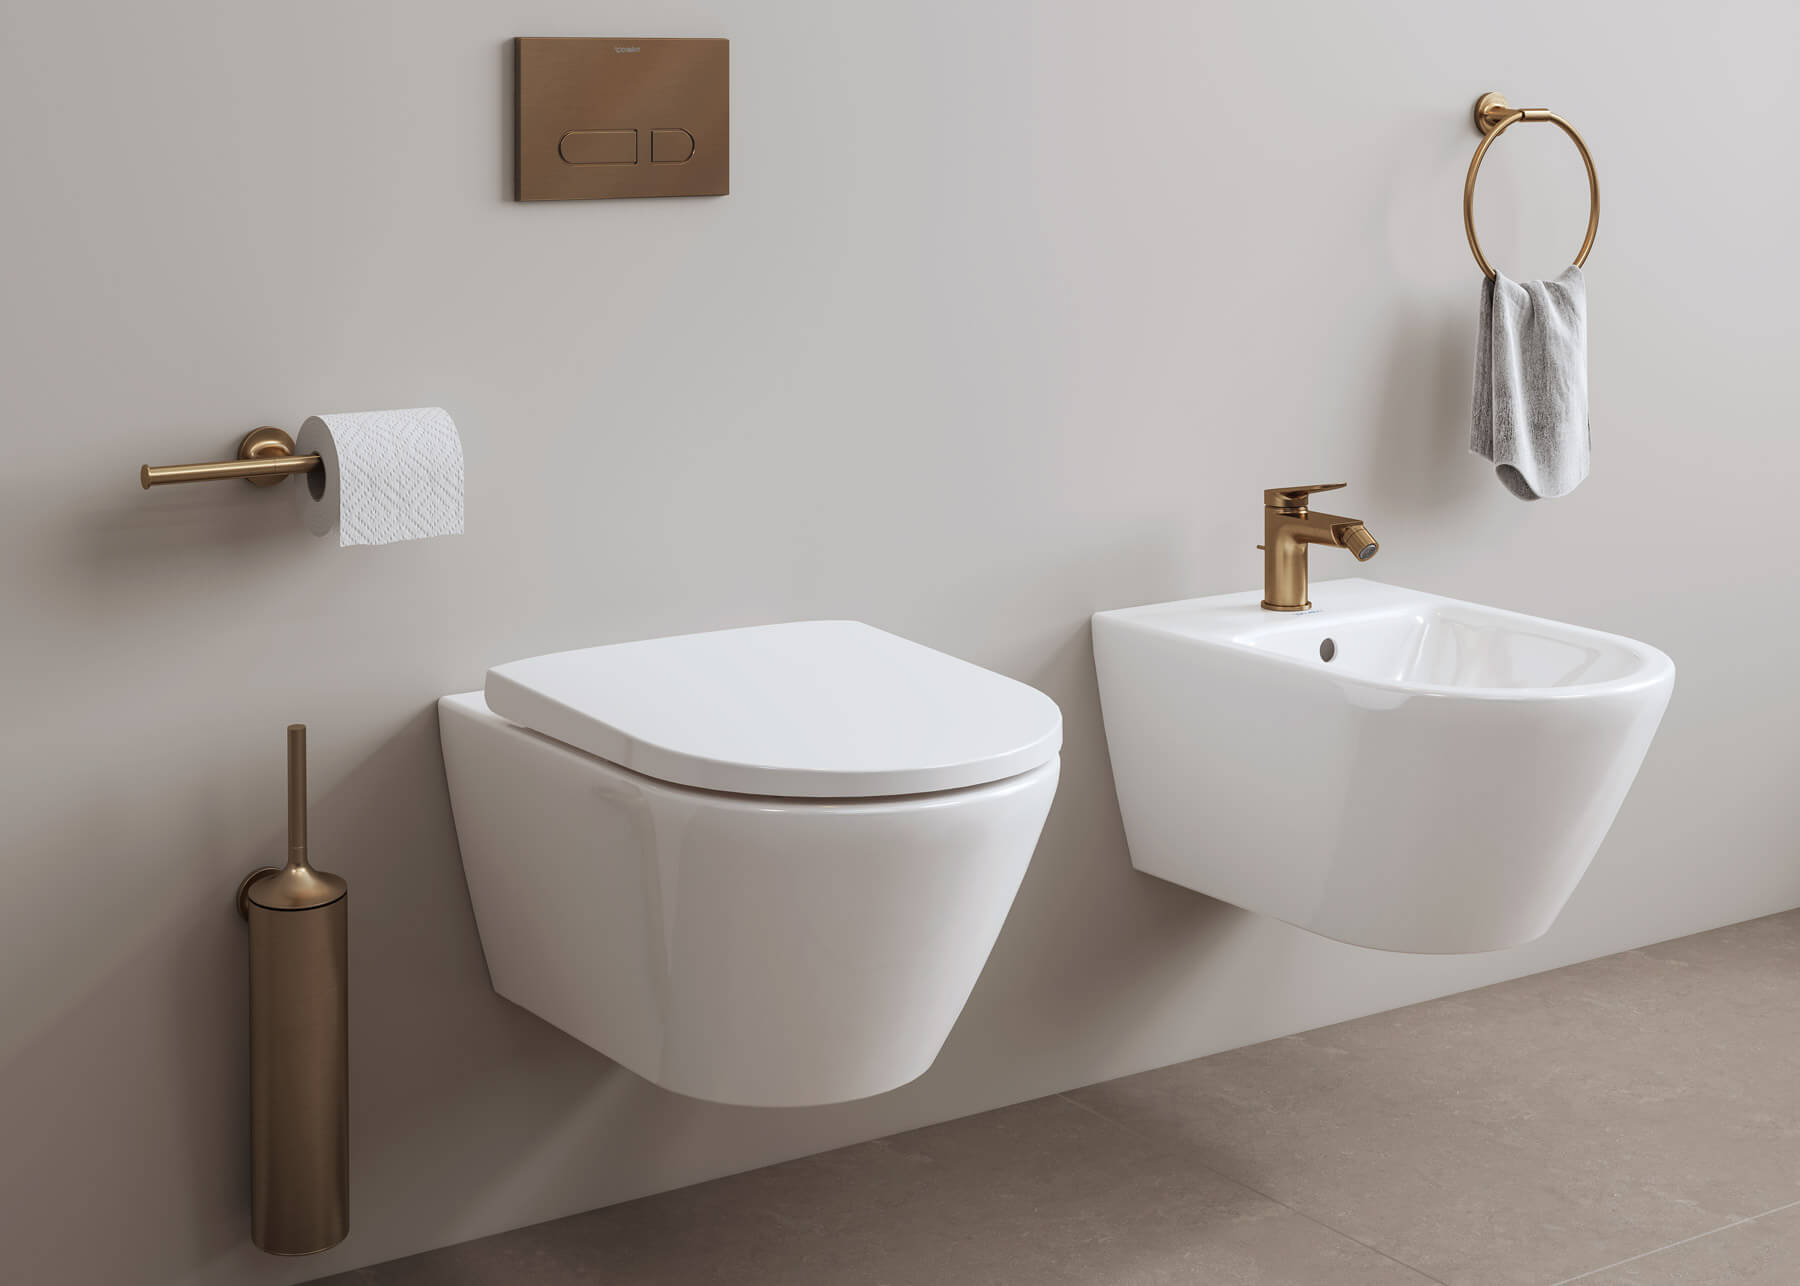 Bidet wall mounted with Wave bidet faucet in gold
